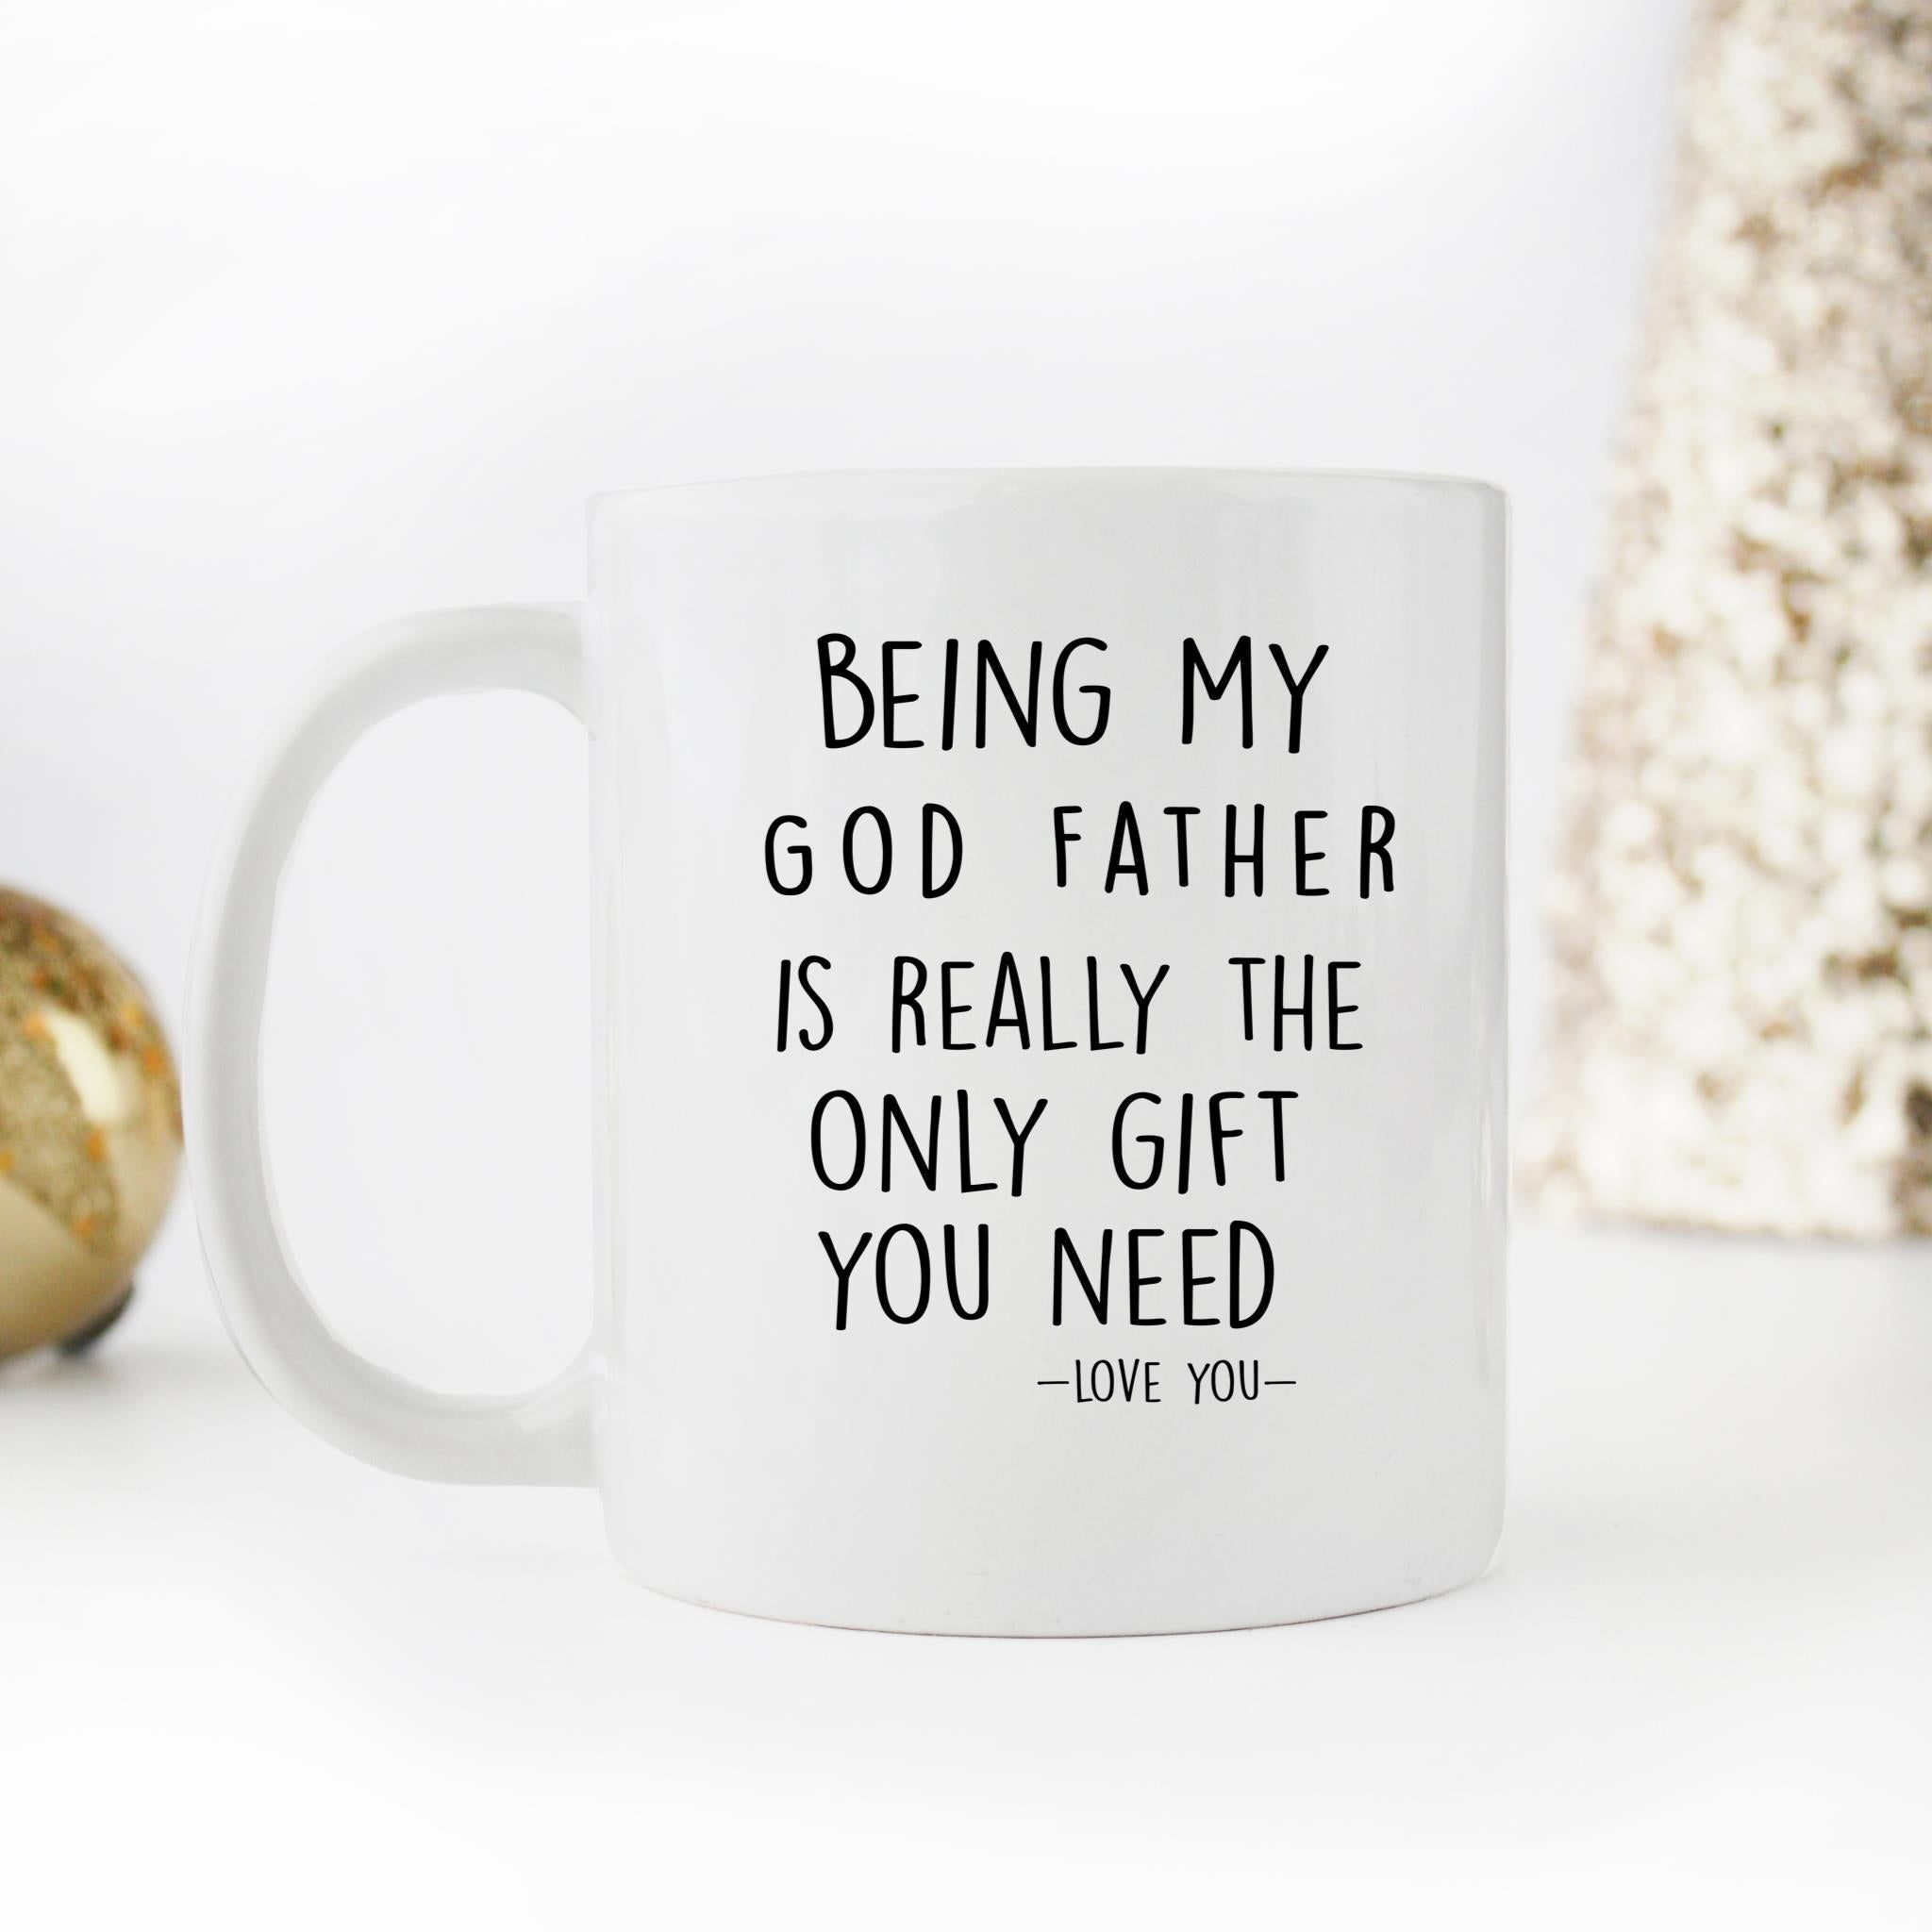 Skitongifts Funny Ceramic Novelty Coffee Mug Being My God Father Is Really The Only You Need  Love You God Father Funny 3S4hUvk